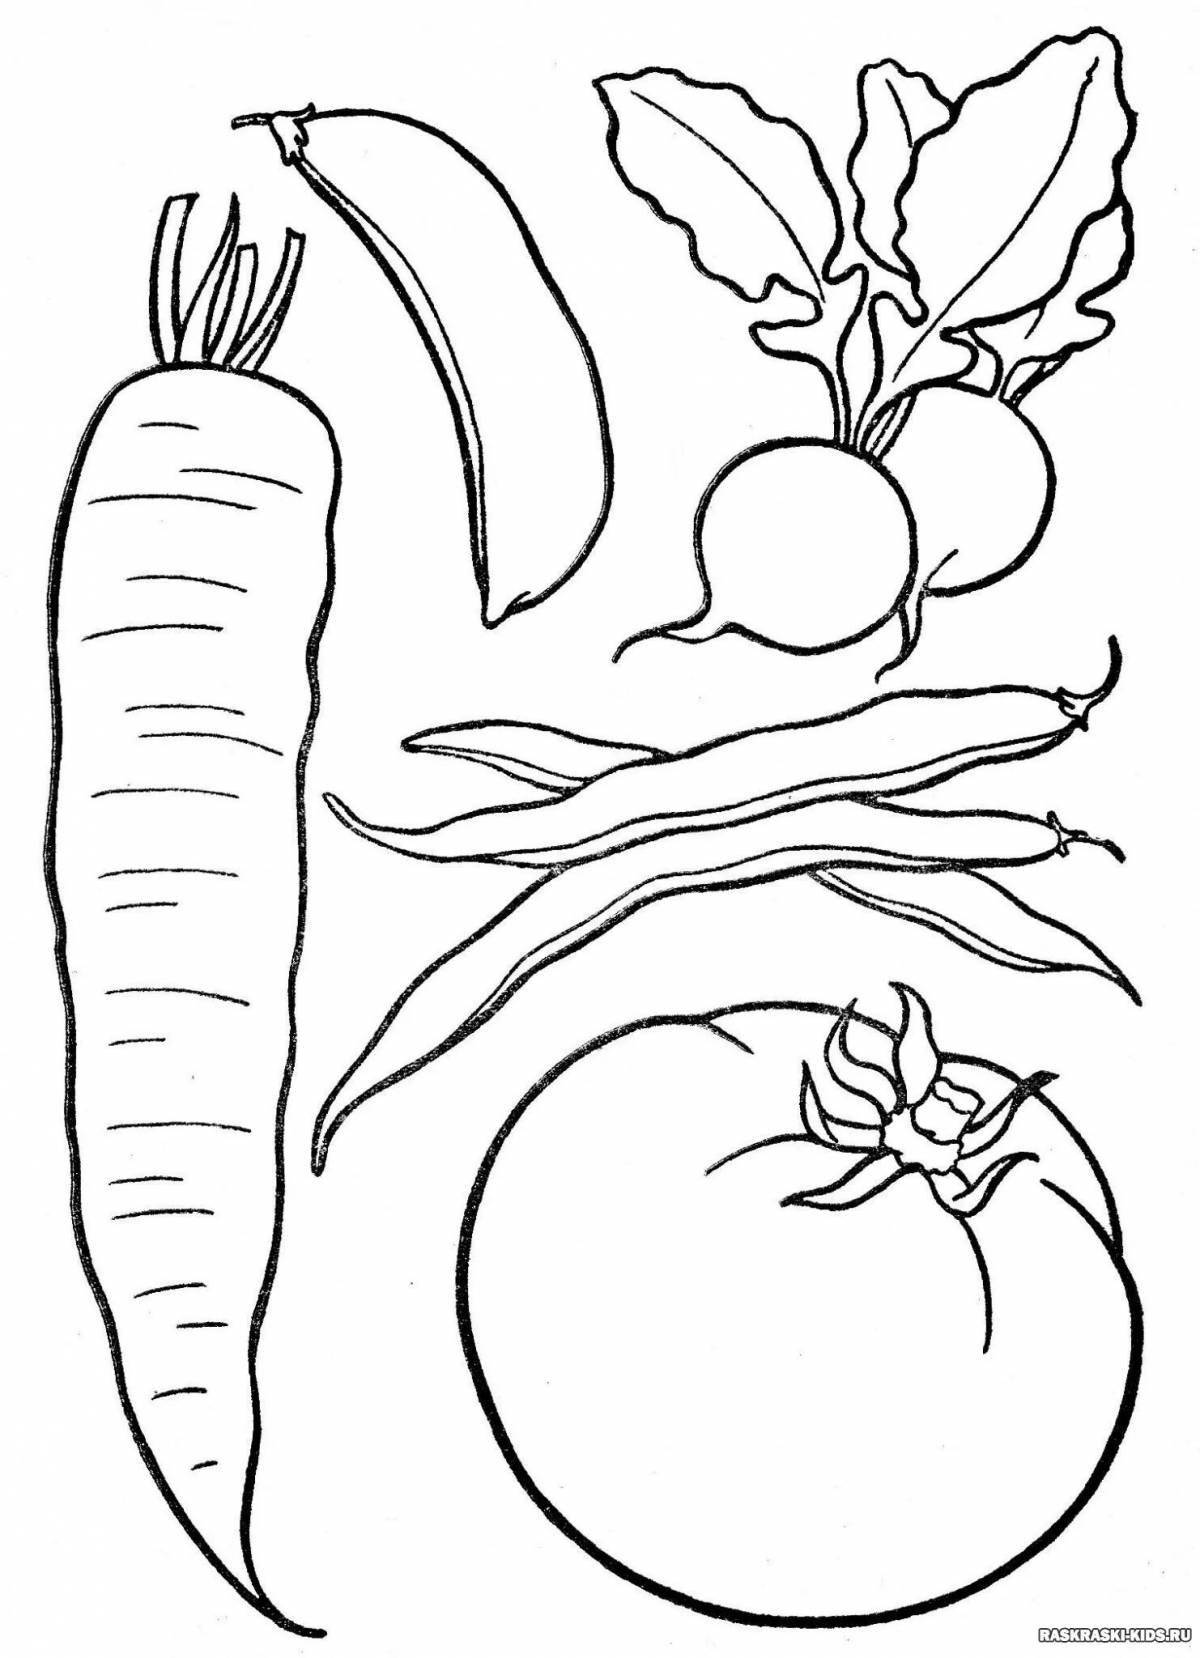 Vegetable coloring book for 4-5 year olds